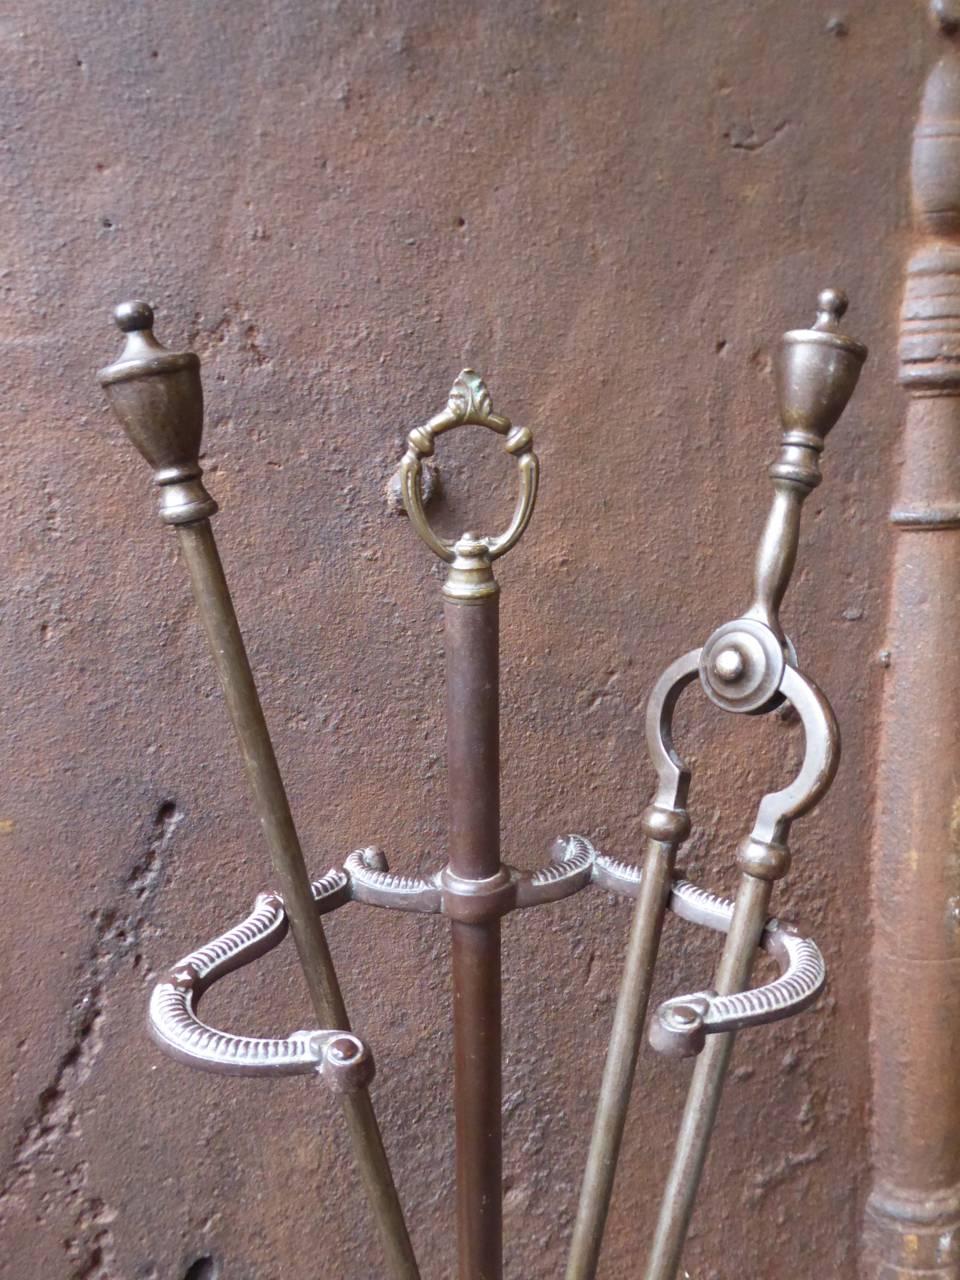 19th century English fireplace tool set, fire irons made of wrought iron and brass.

We have a unique and specialized collection of antique and used fireplace accessories consisting of more than 1000 listings at 1stdibs. Amongst others, we always